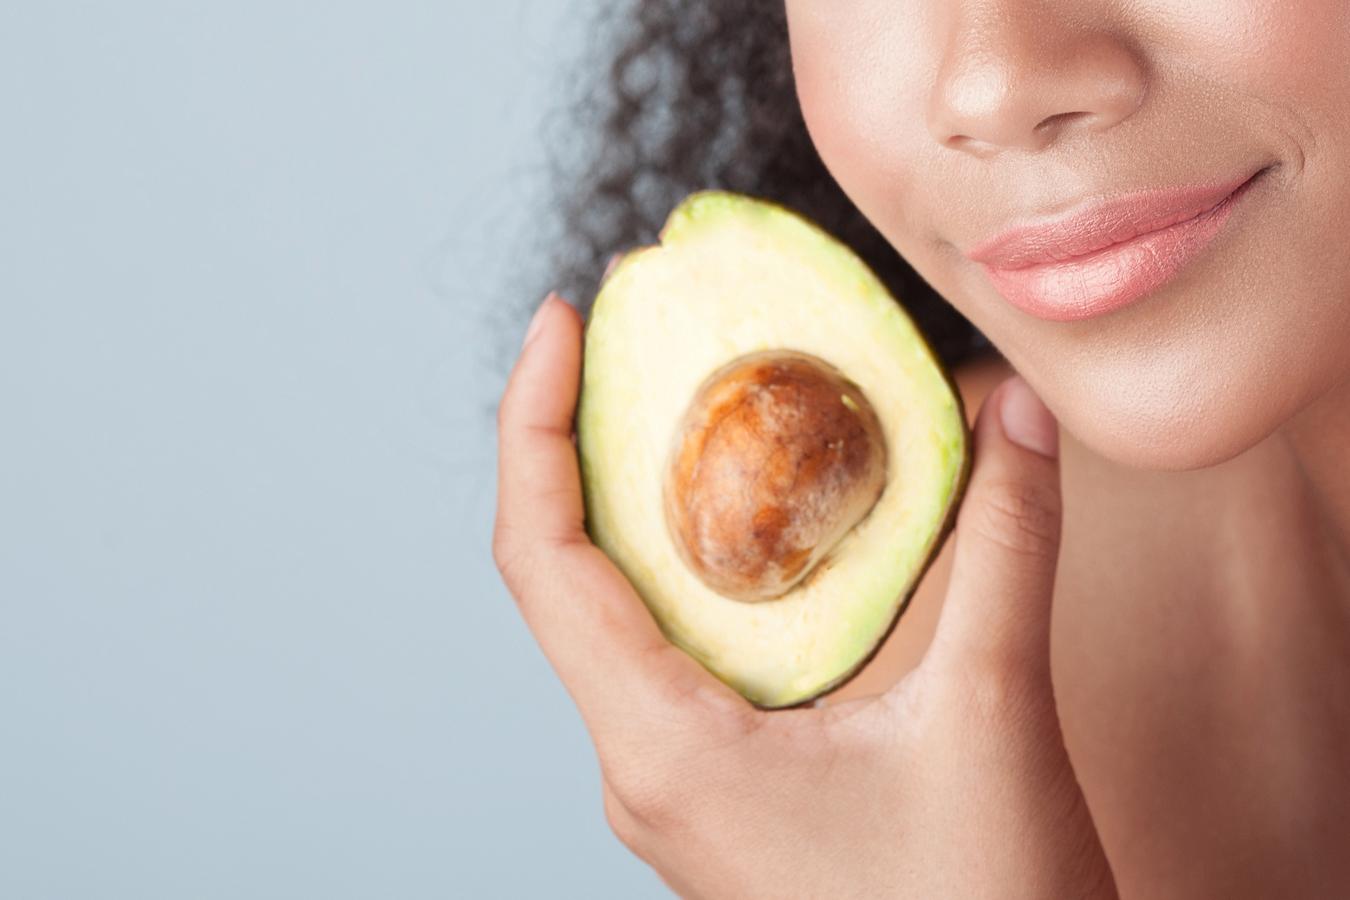 Avocado face mask benefits include glowing skin and health benefits for any skin type